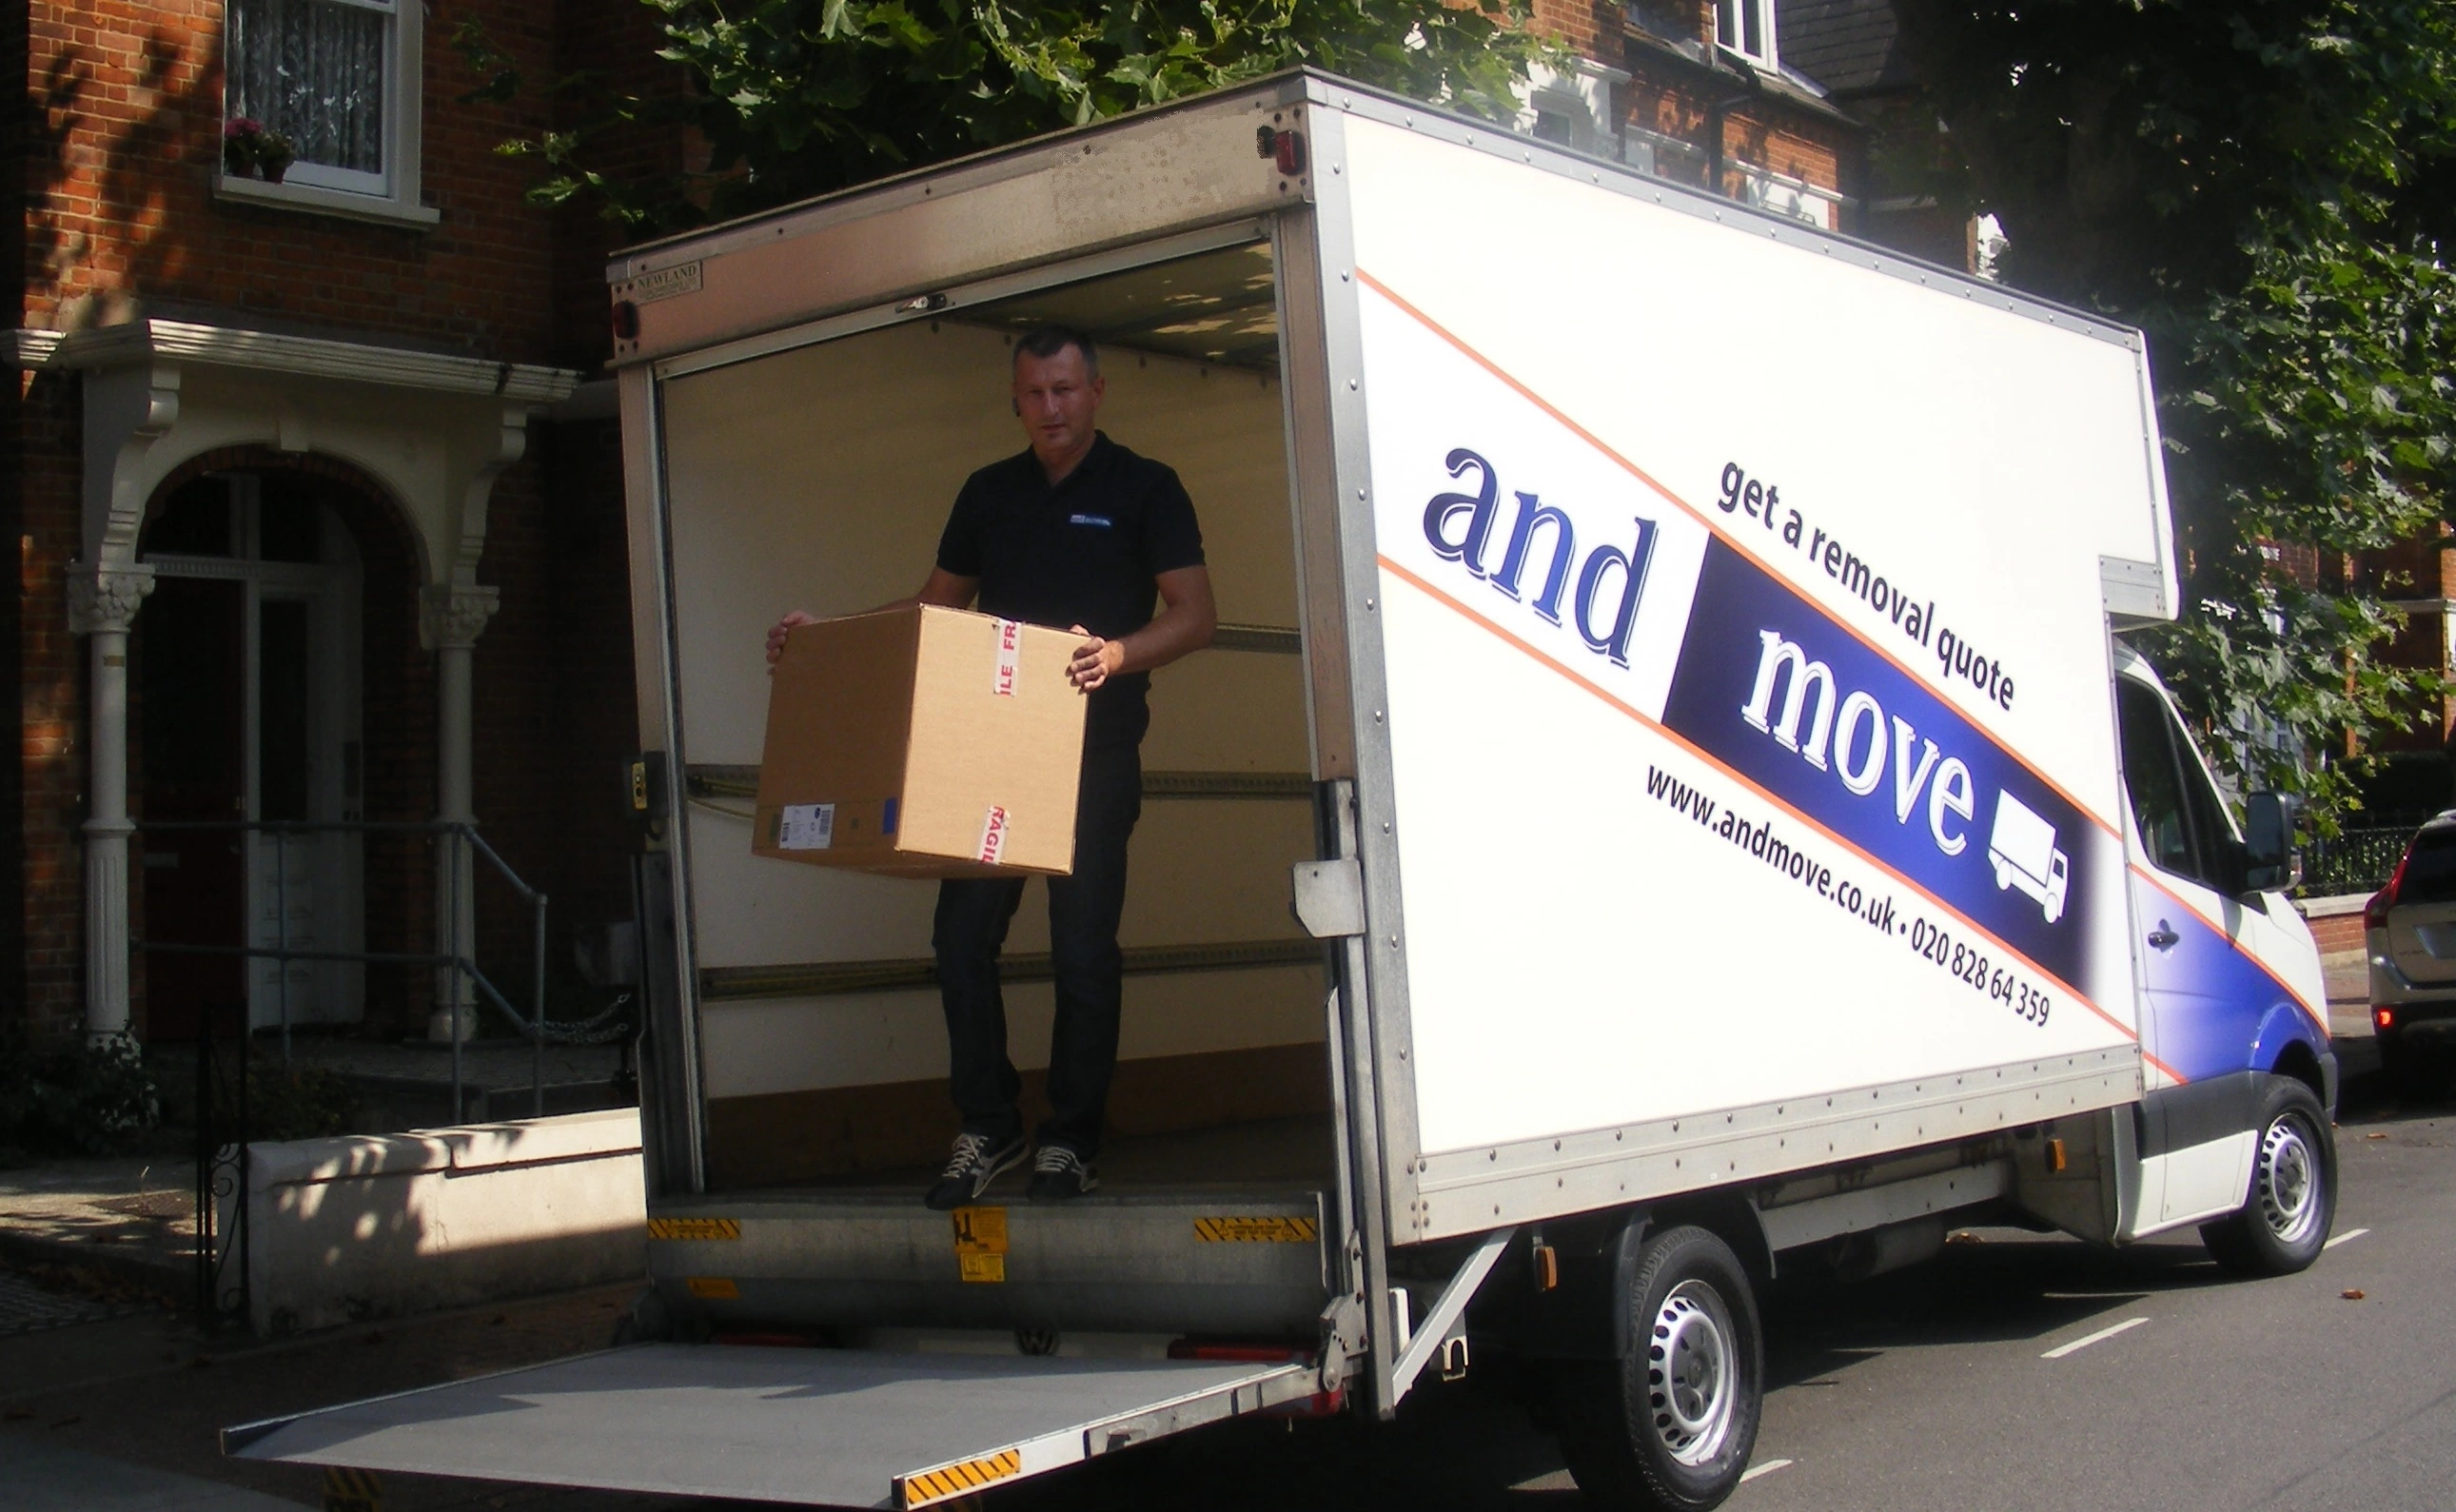 42 Creatice Home removals south west london for Living room